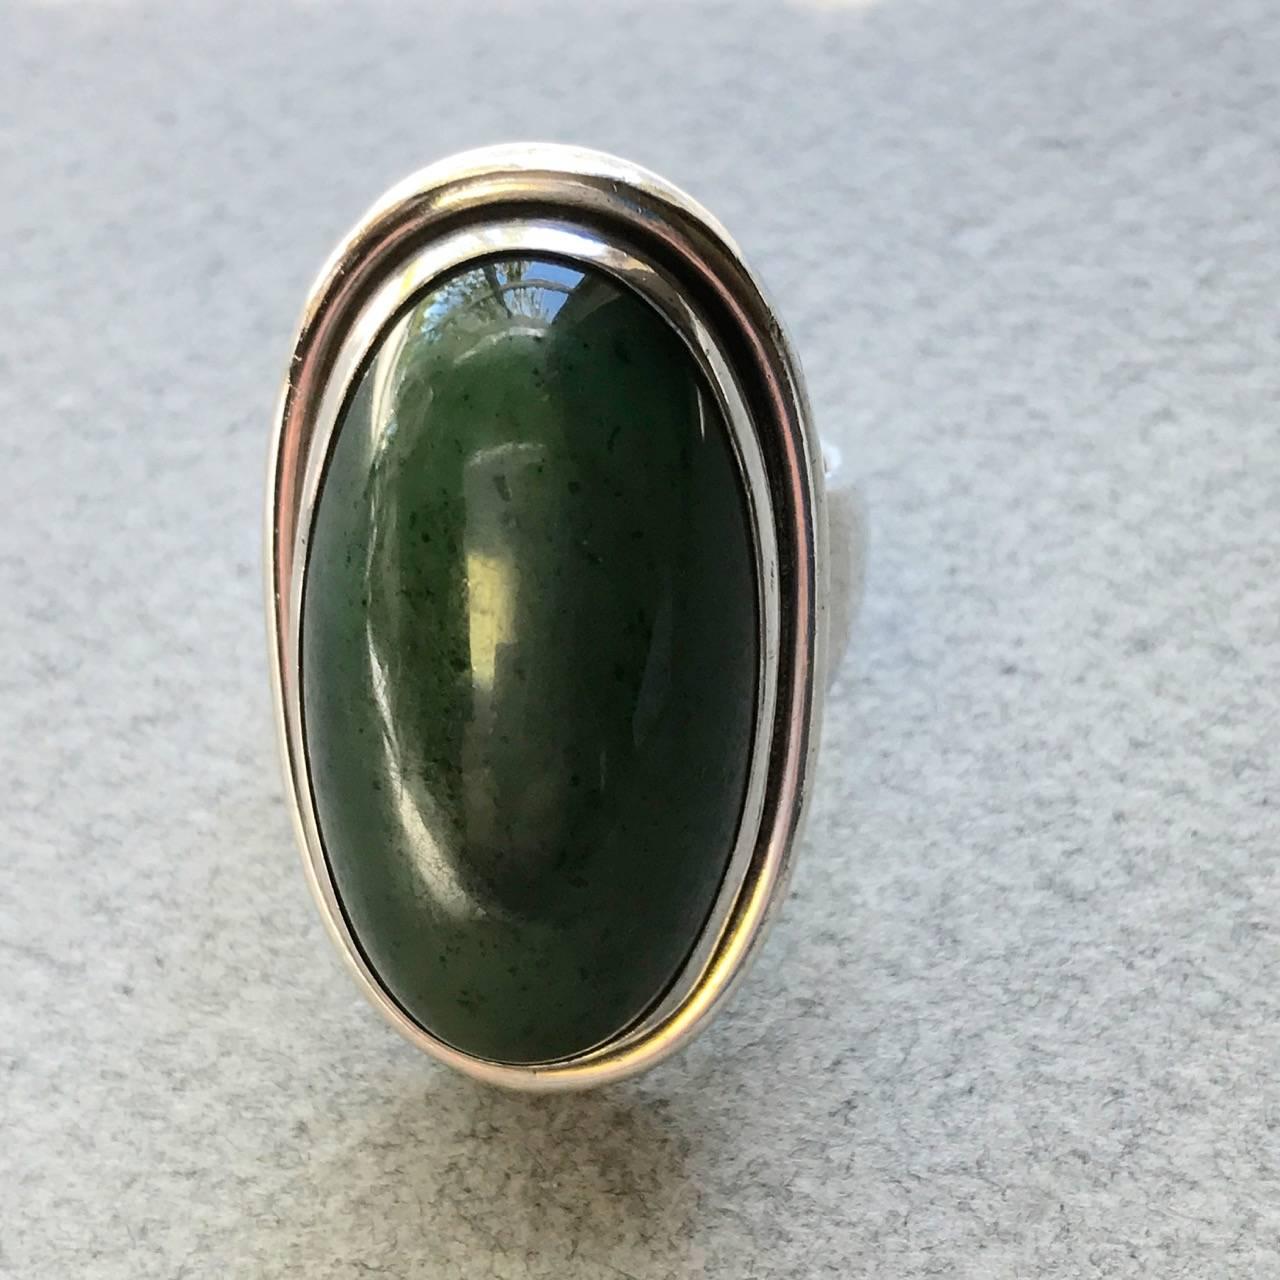 Georg Jensen Sterling Silver Ring No 46E With Jade By Harald Nielsen

This is the largest version of this model. Unusual in that the large piece of mounted jade is speckled. A very bold look and highly sought after Jensen unisex design, this vintage